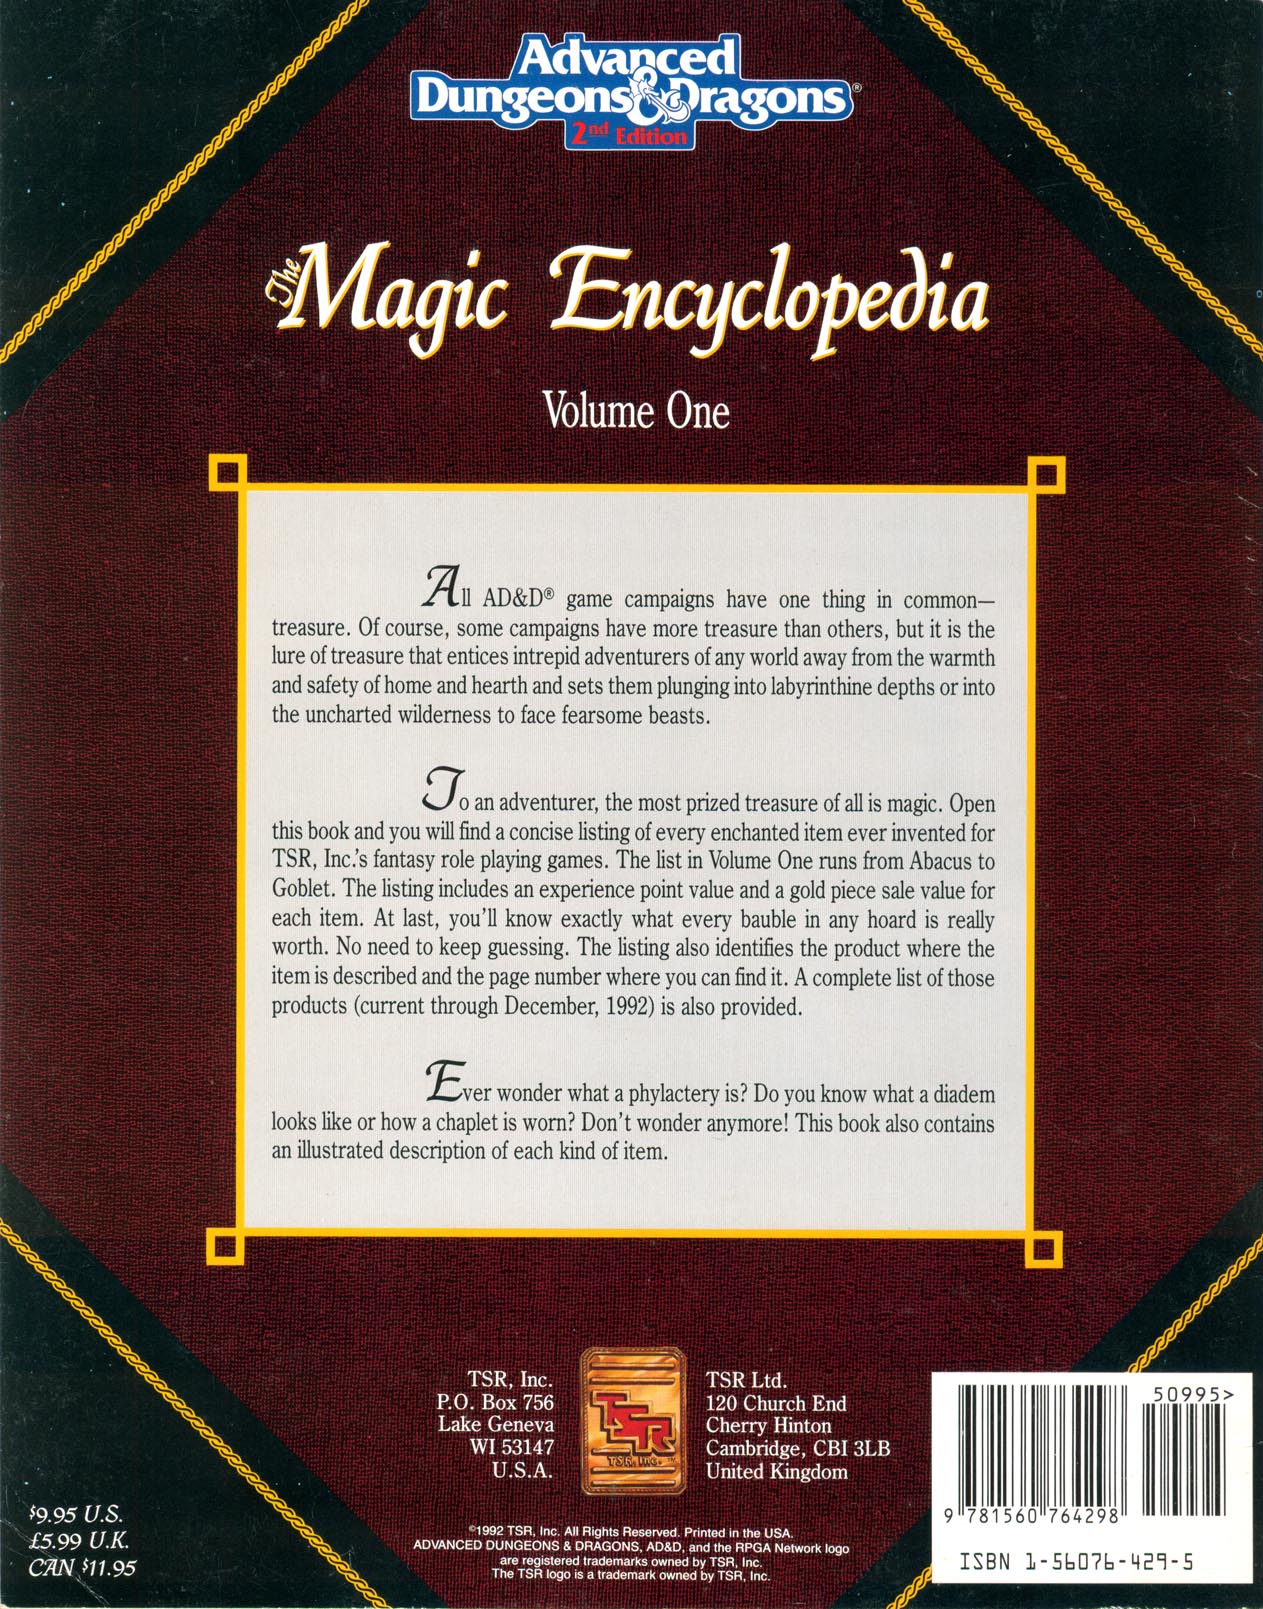 DUNGEONS & DRAGONS - THE MAGIC ENCYCLOPEDIA: VOLUME 1 - 9232 - RPG RELIQUARY